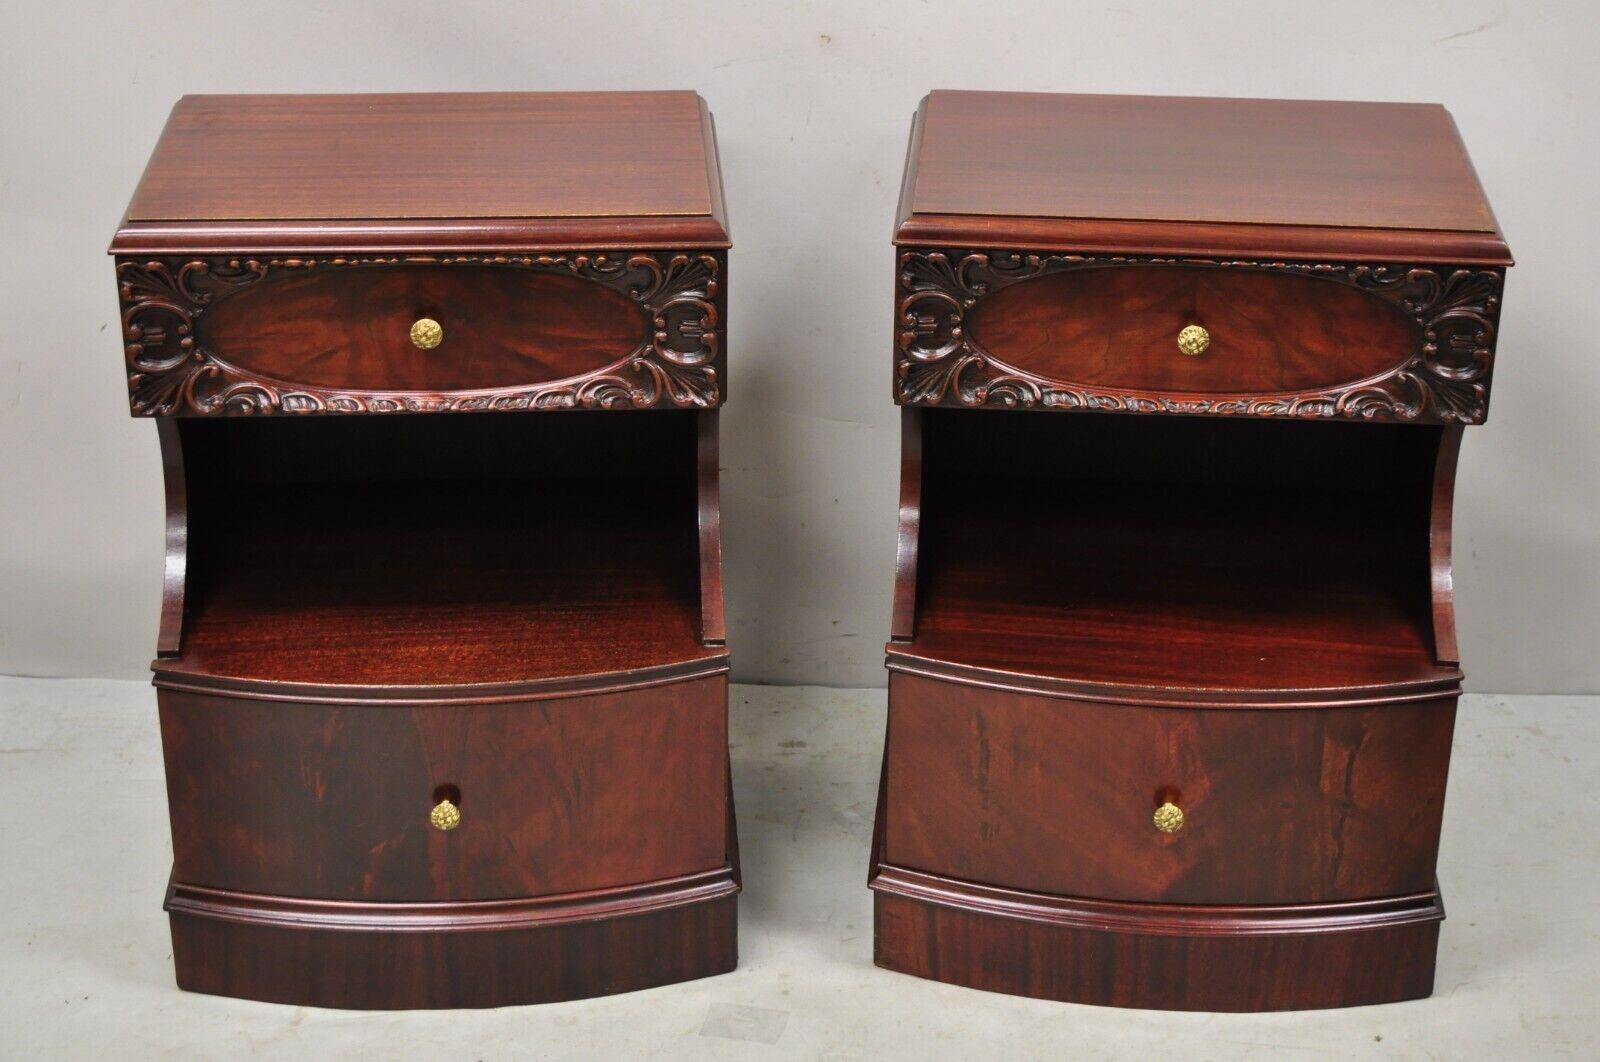 Pair of Vintage Chinese Chippendale Flame Mahogany 2 Drawer Nightstands Bedside Tables. Item features beautiful wood grain, nicely carved details, 2 drawers, very nice vintage pair, quality American craftsmanship, great style and form. Circa Early